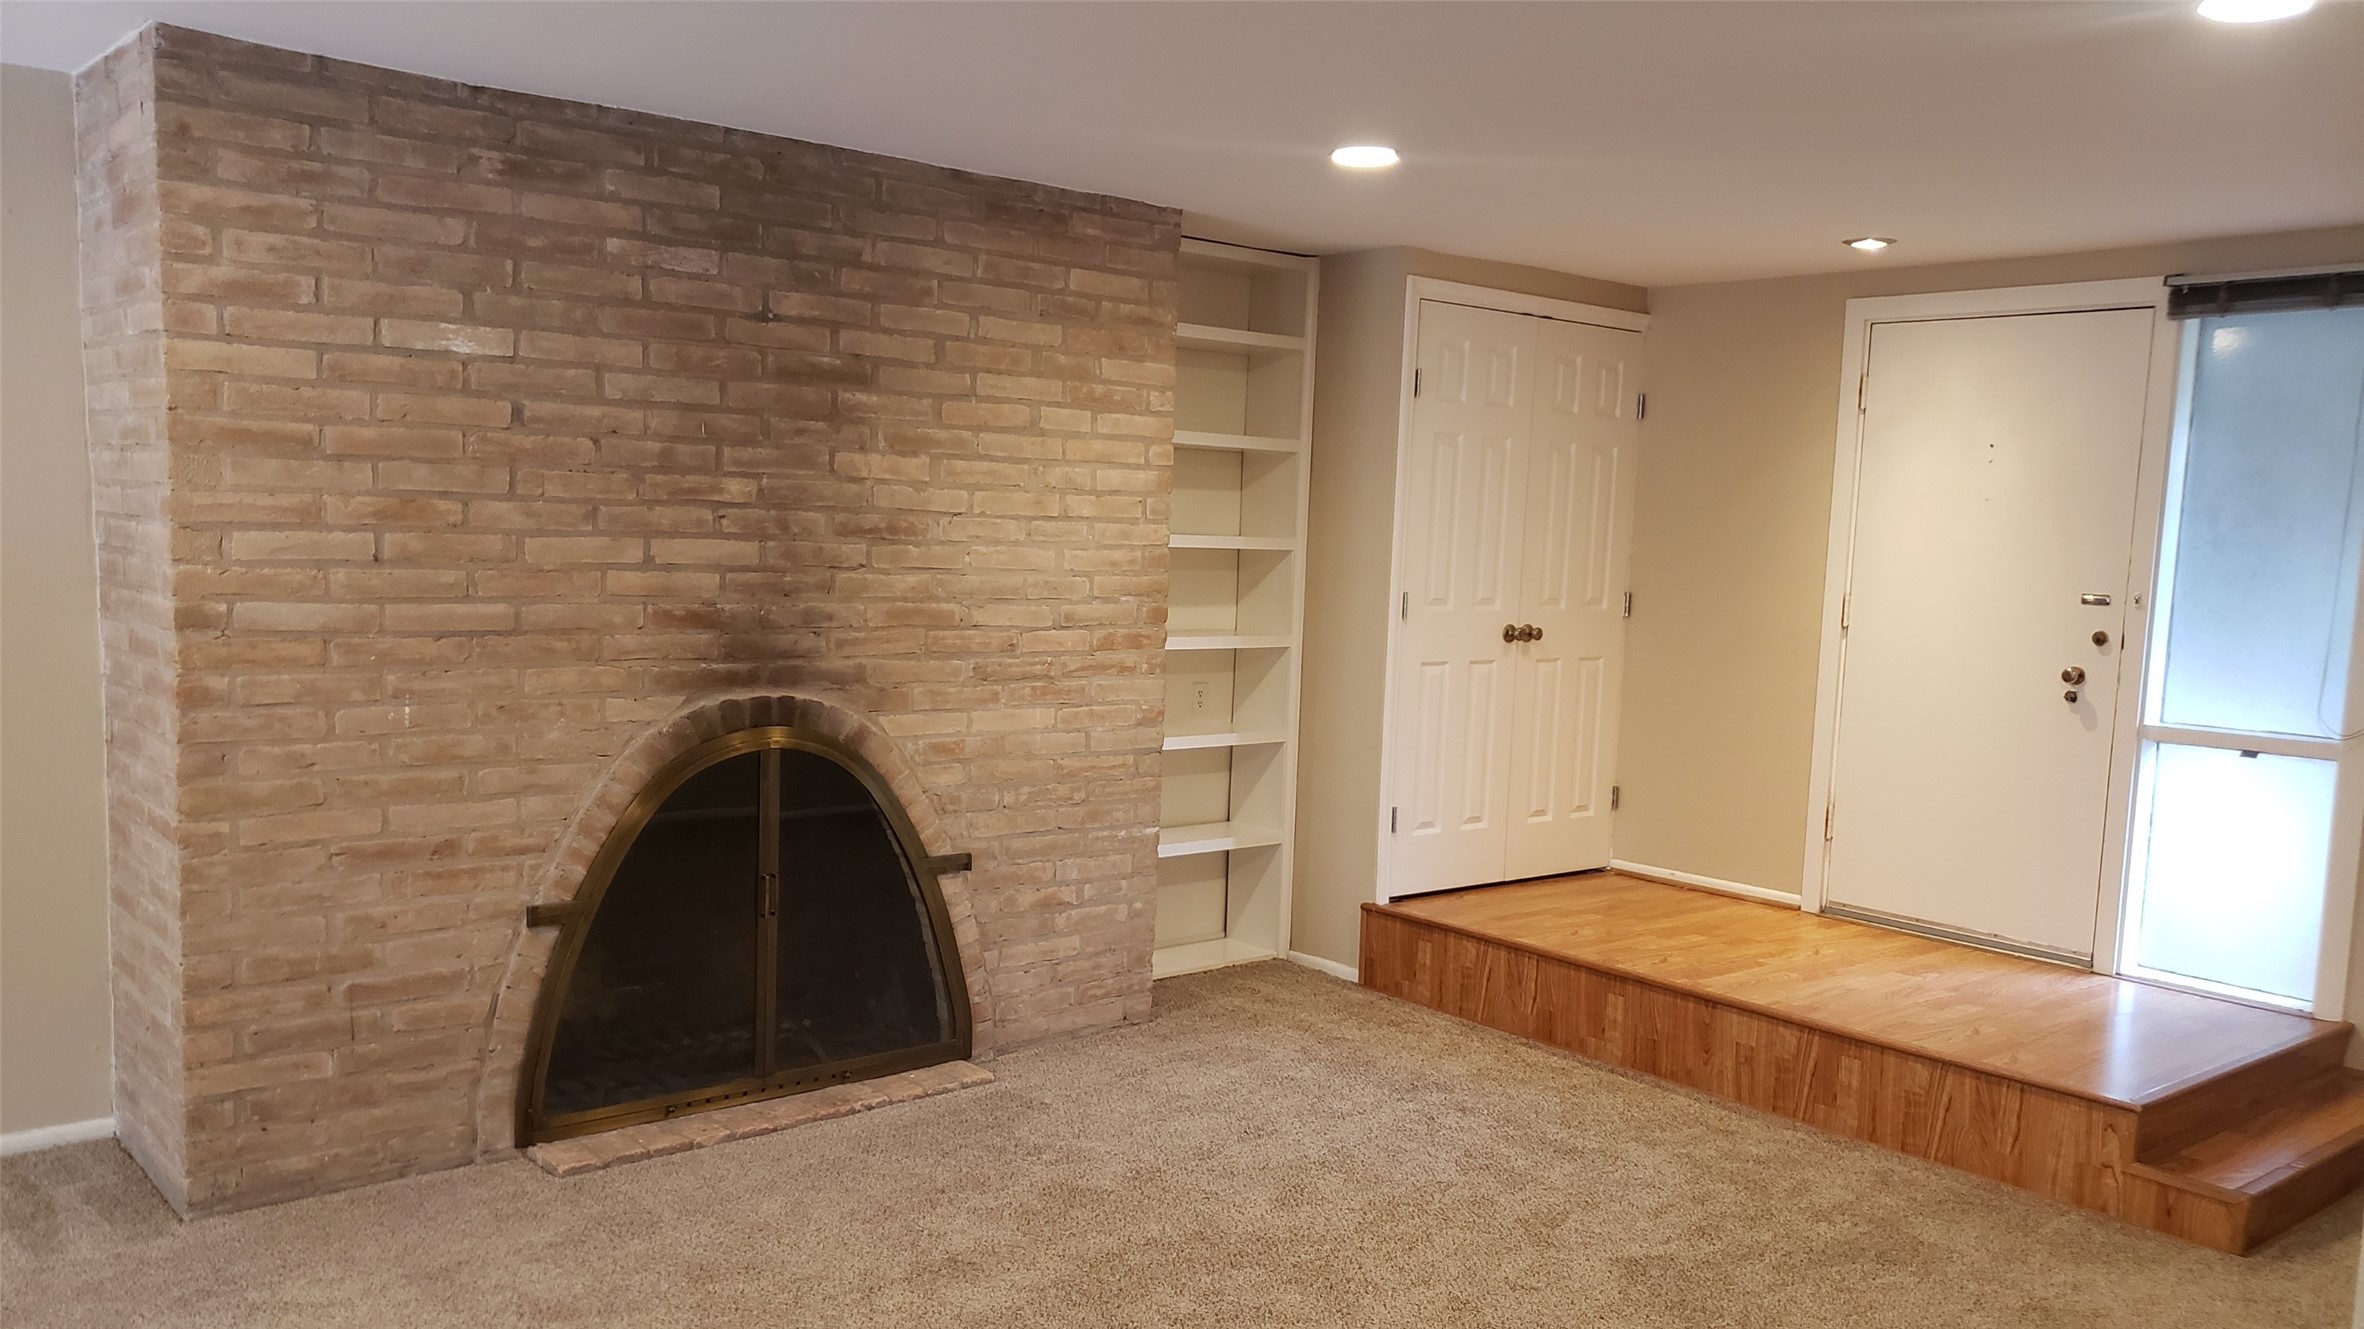 Fireplace in living area. Elevated entry with built in bookshelves & storage closet.